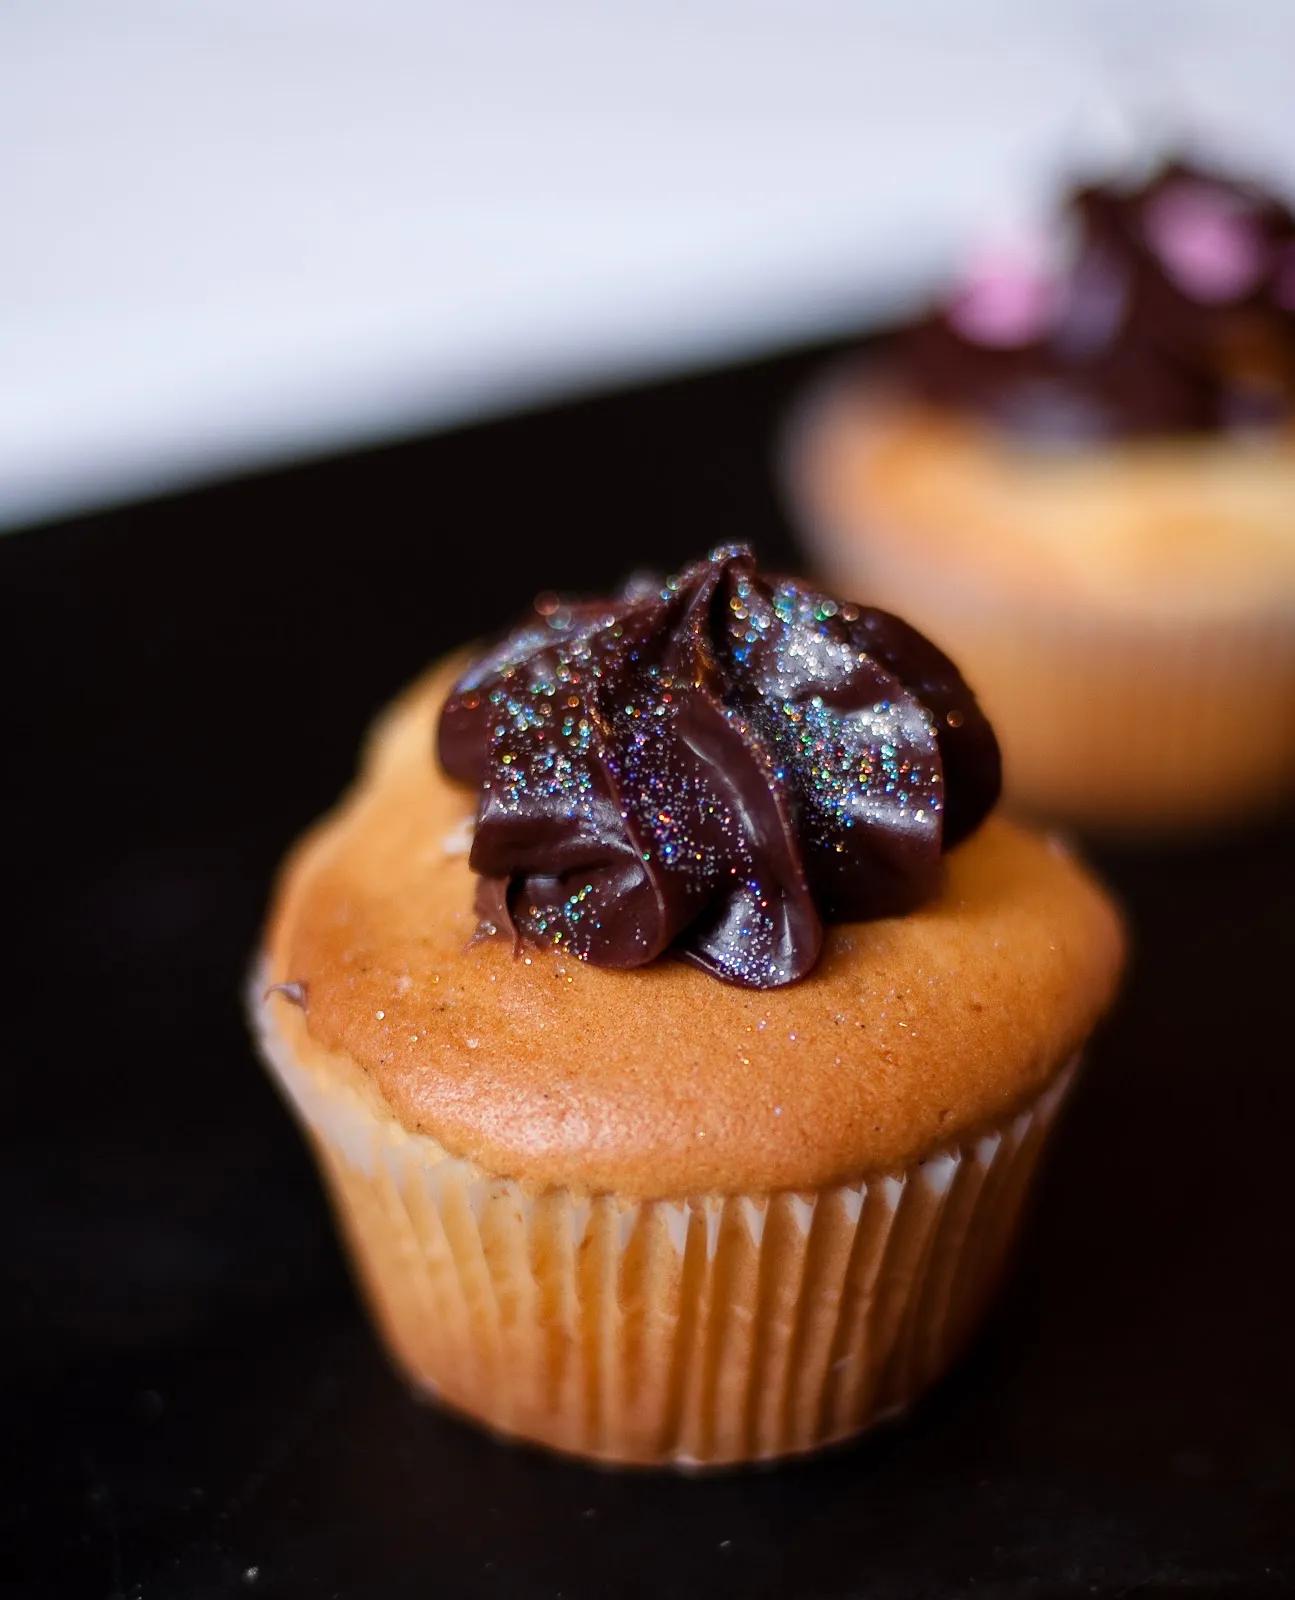 Cuisine et Plaisirs by Linda: Cupcake vanille topping chocolat